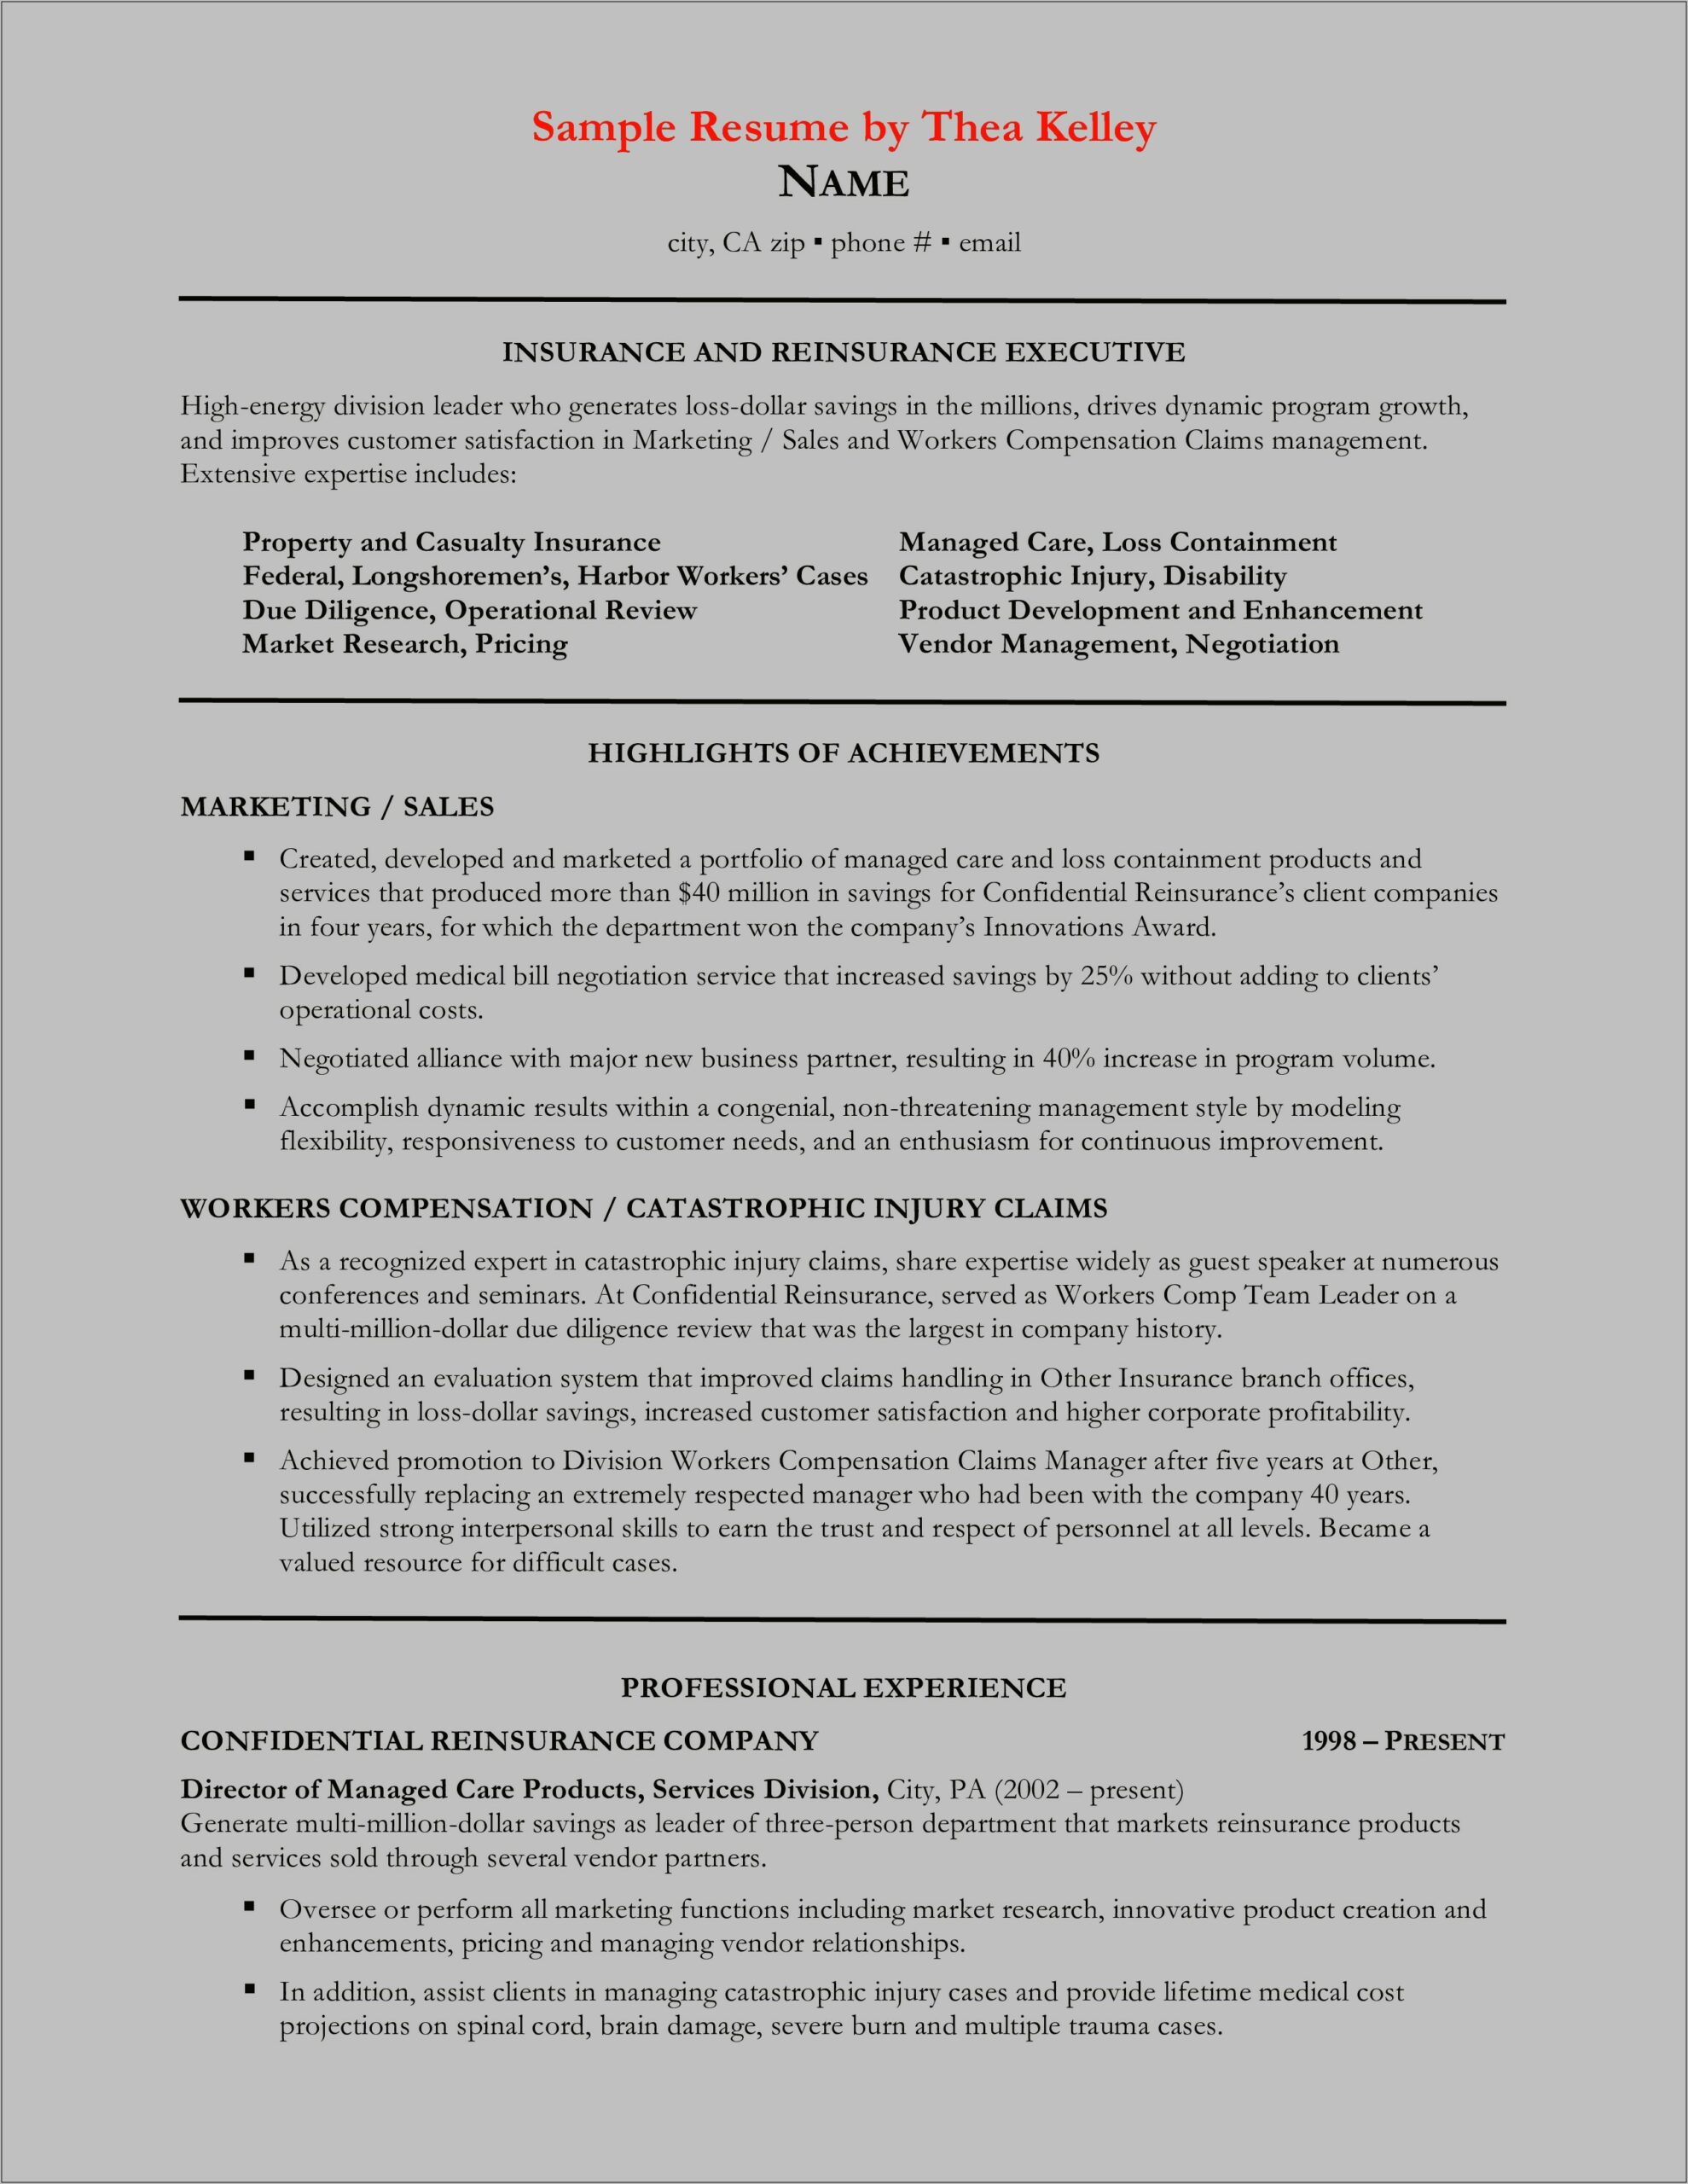 Sample Resume For Insurance Operations Manager